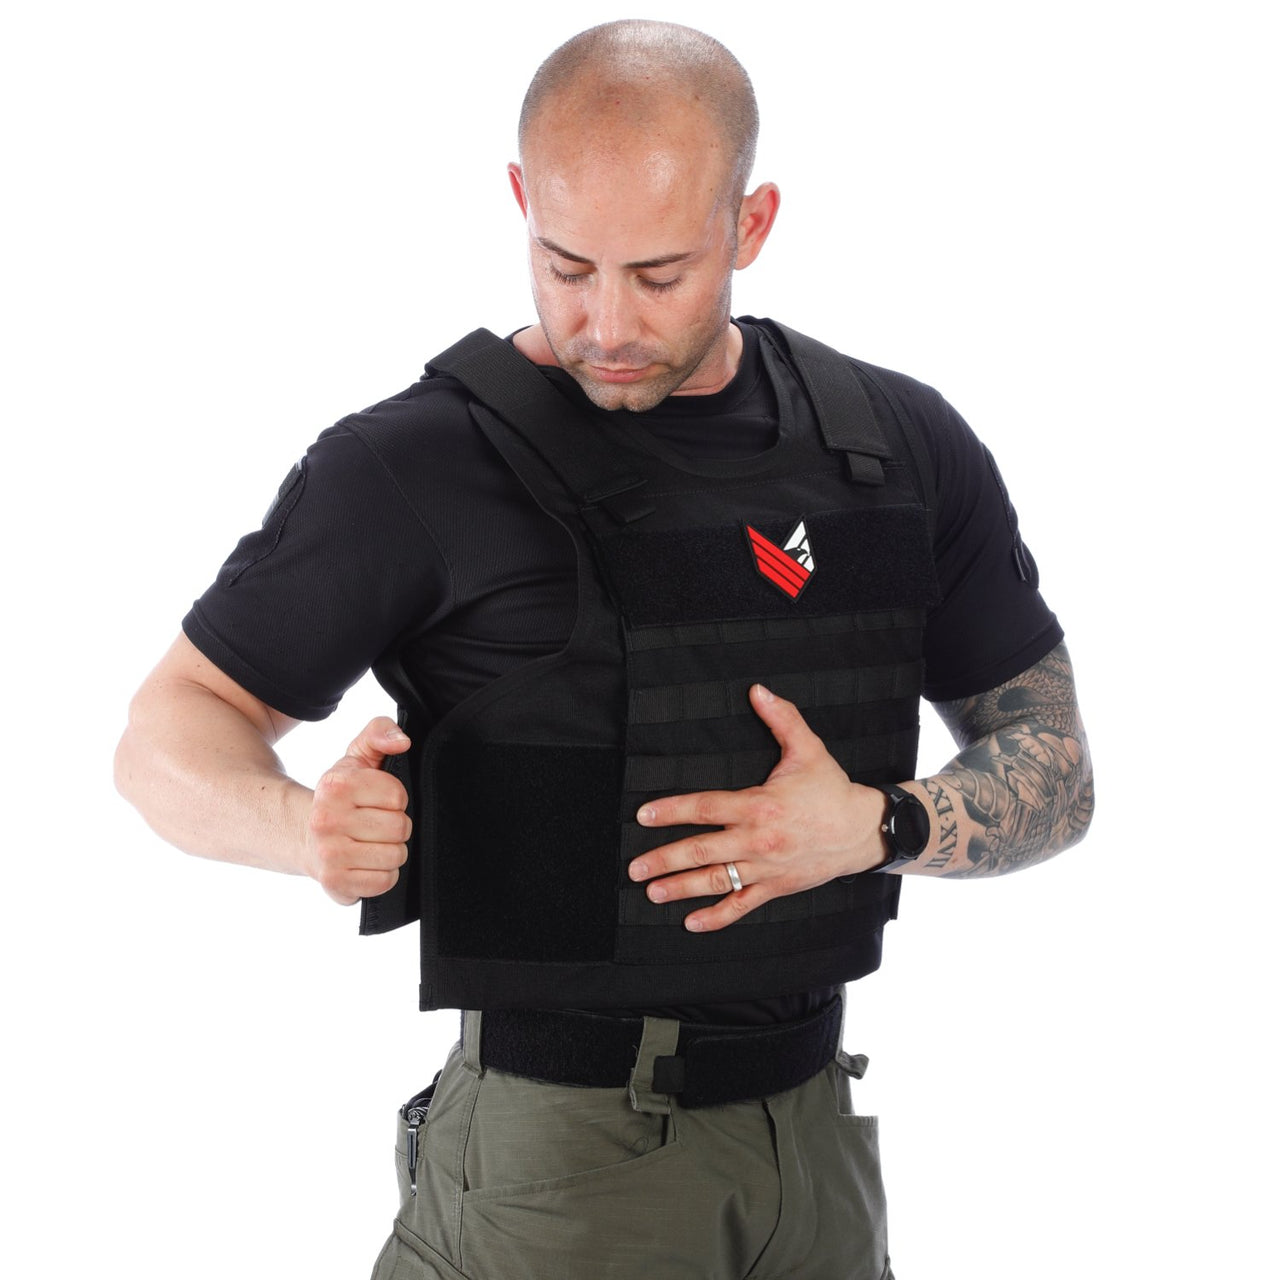 A man wearing the Body Armor Direct All Star Tactical Enhanced Multi-Threat Vest on a white background.